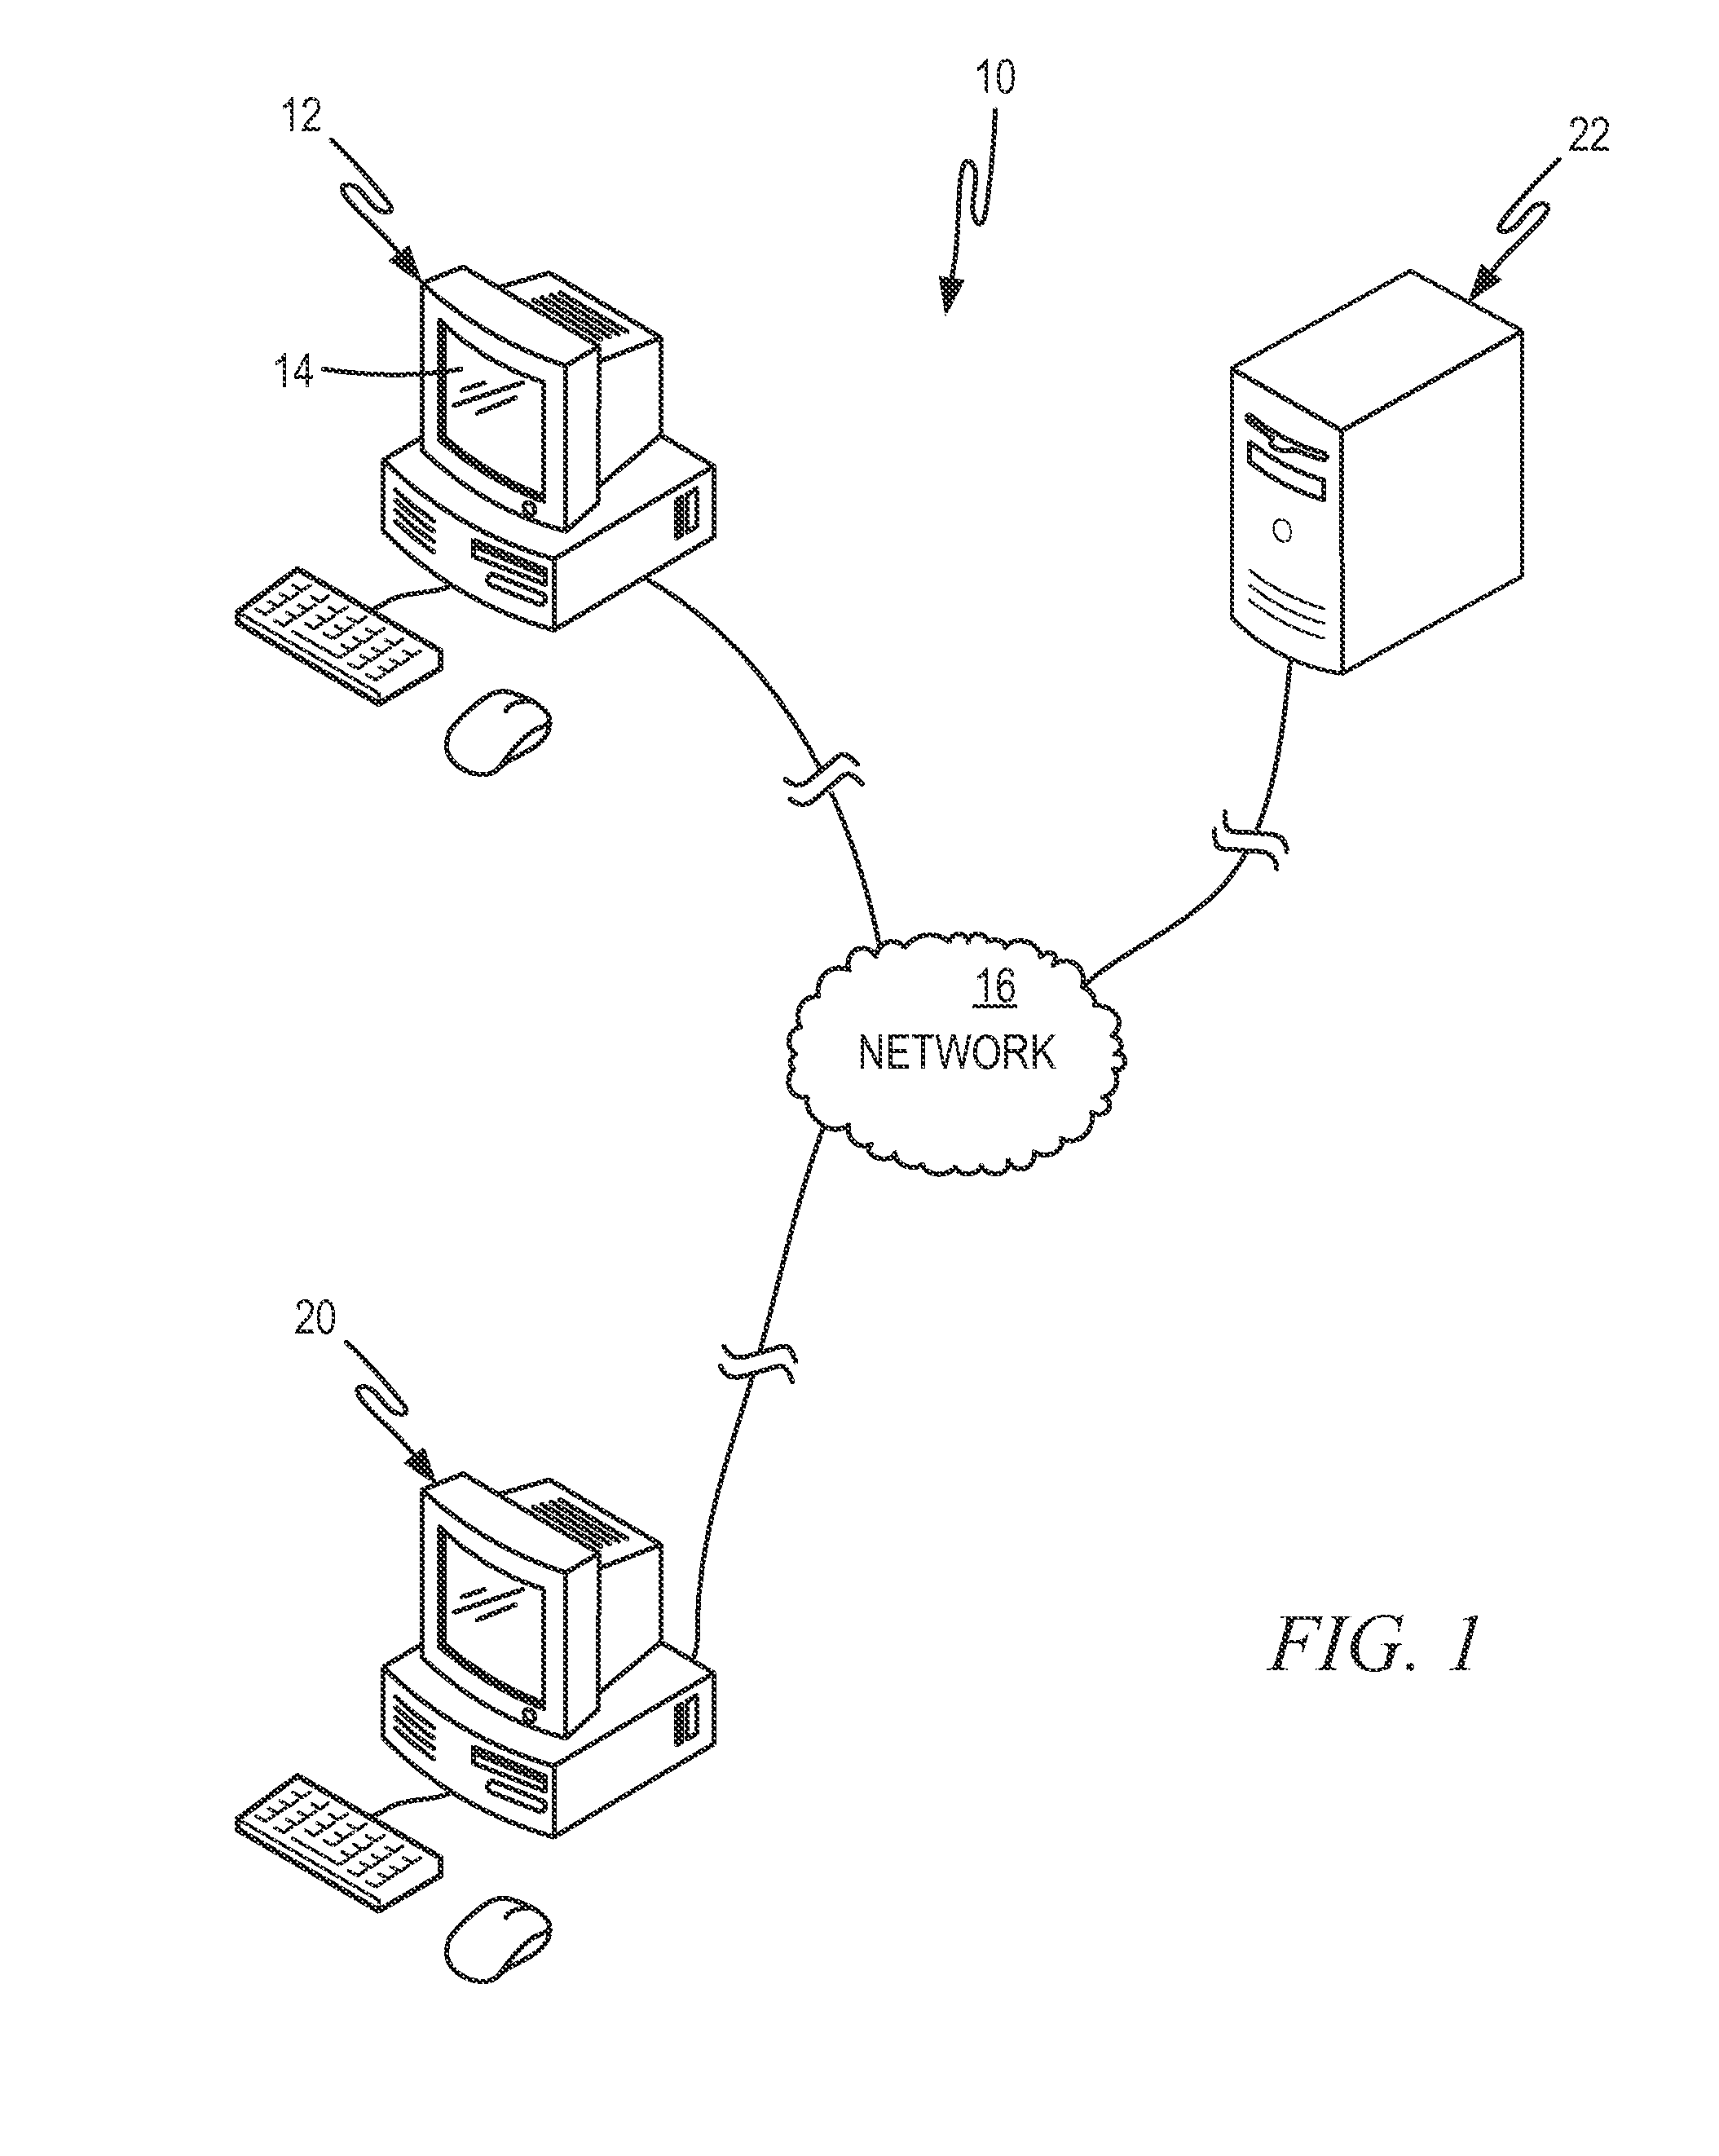 Method and apparatus for recommending an alternative to a prescription drug requiring prior authorization